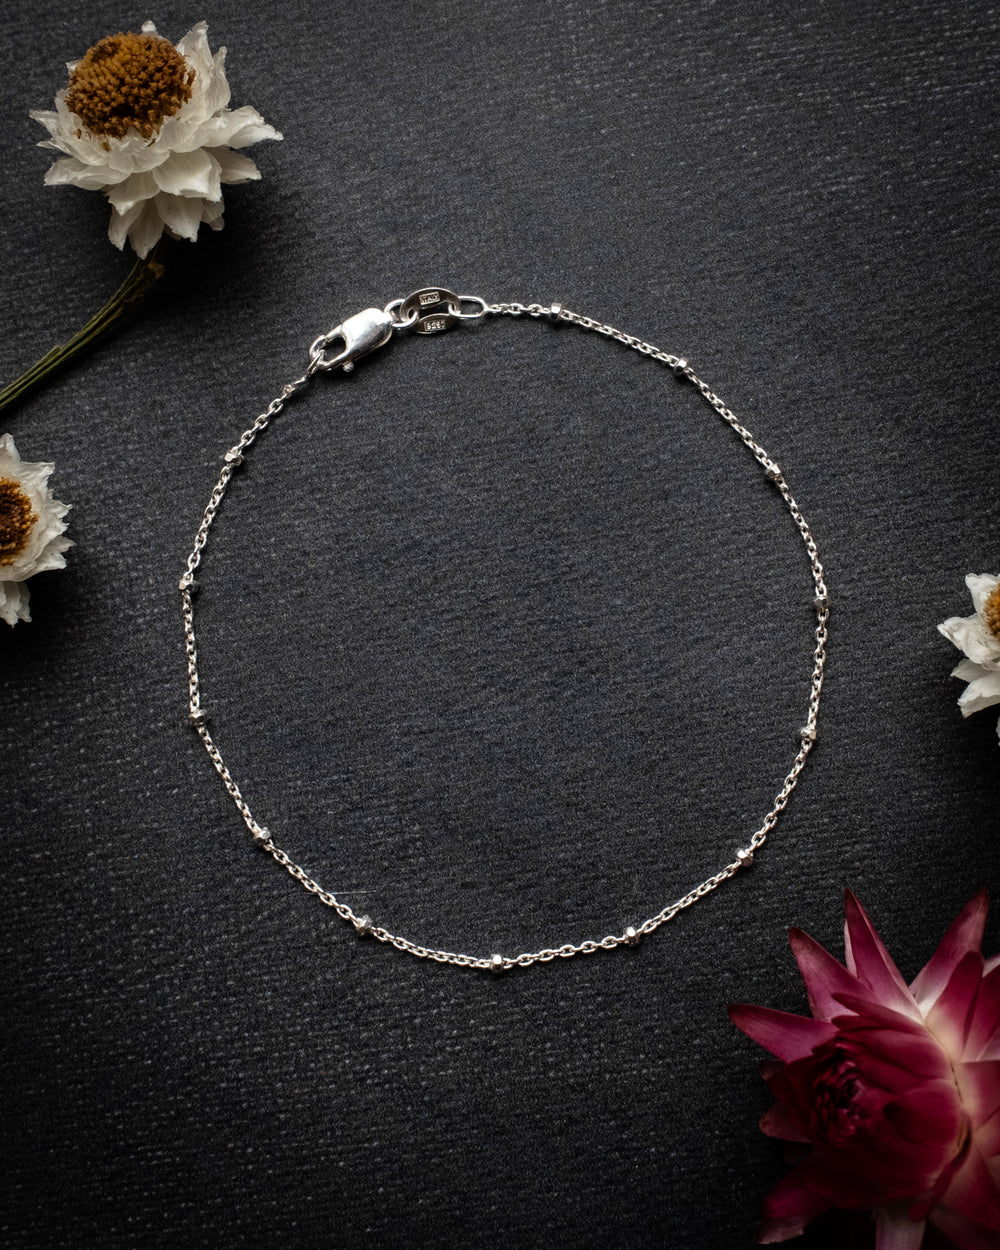 Recycled Sterling Silver Satellite Bracelet - The Healing Pear